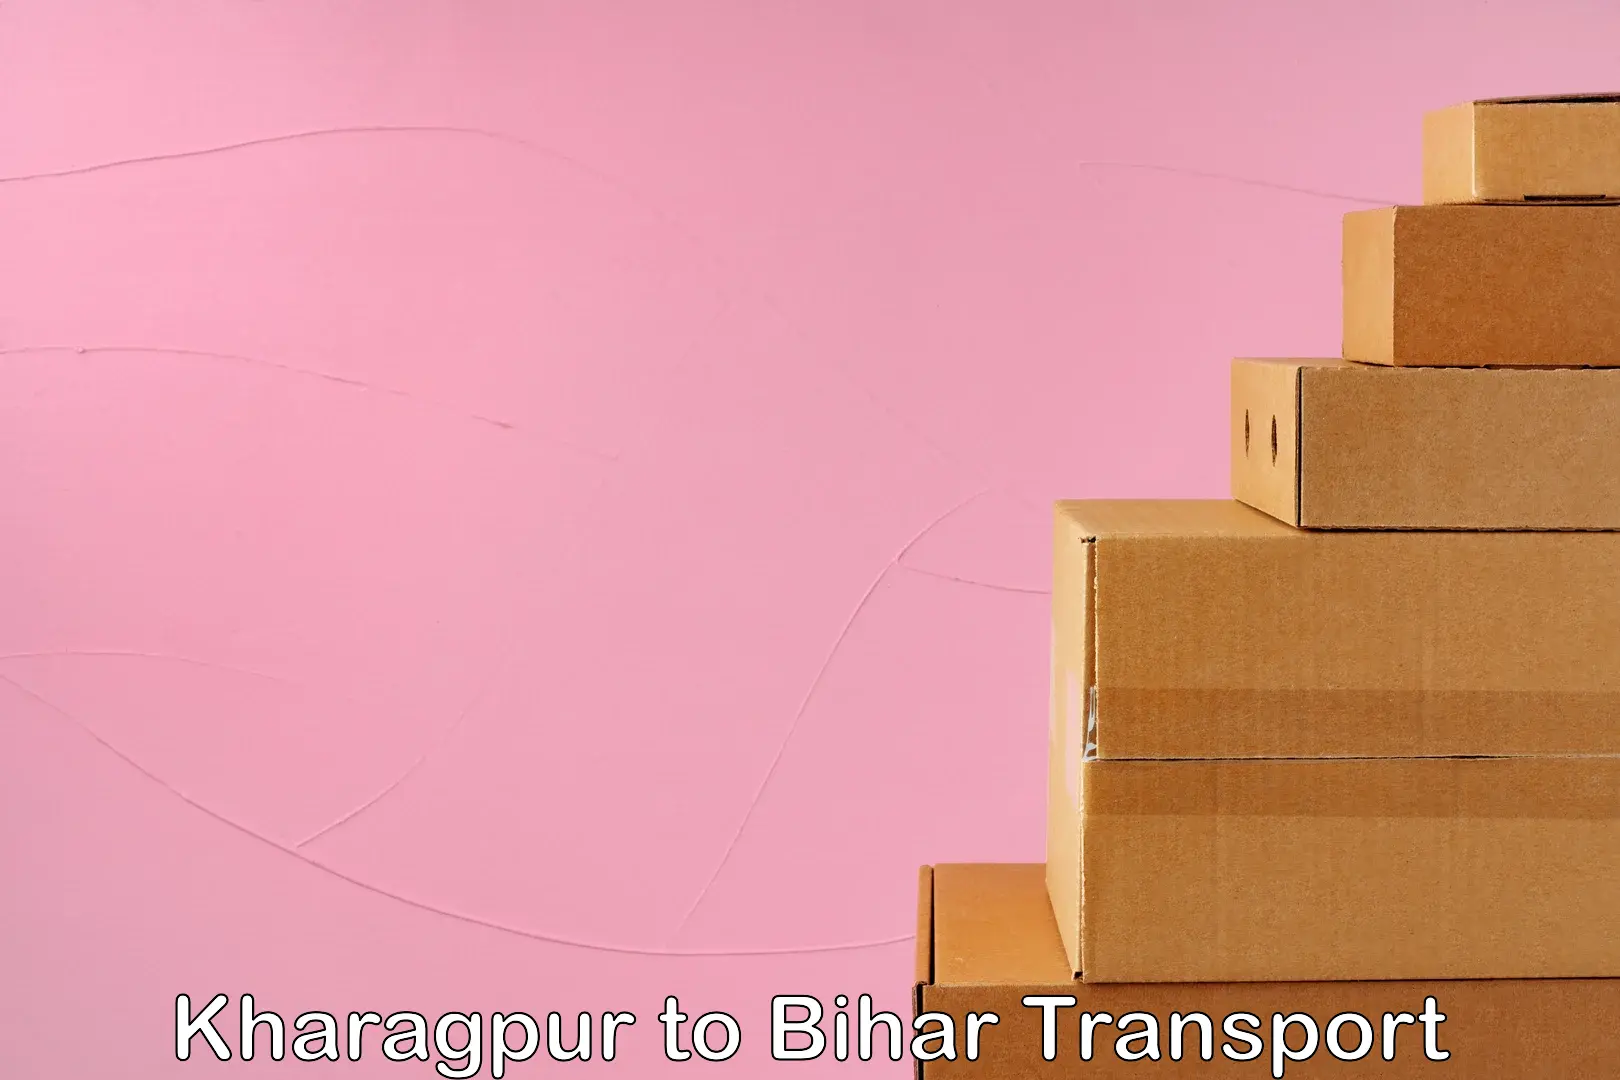 Air freight transport services in Kharagpur to Bihar